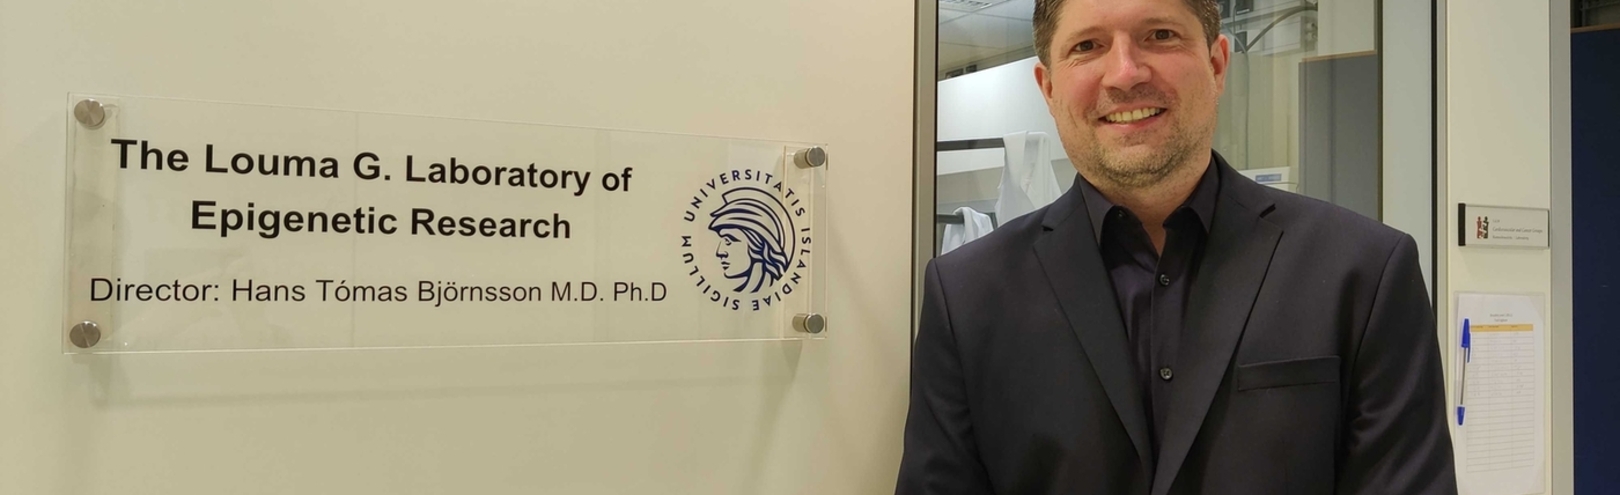 Professor at the UI Faculty of Medicine awarded research grant of ISK 260 million - Available at University of Iceland